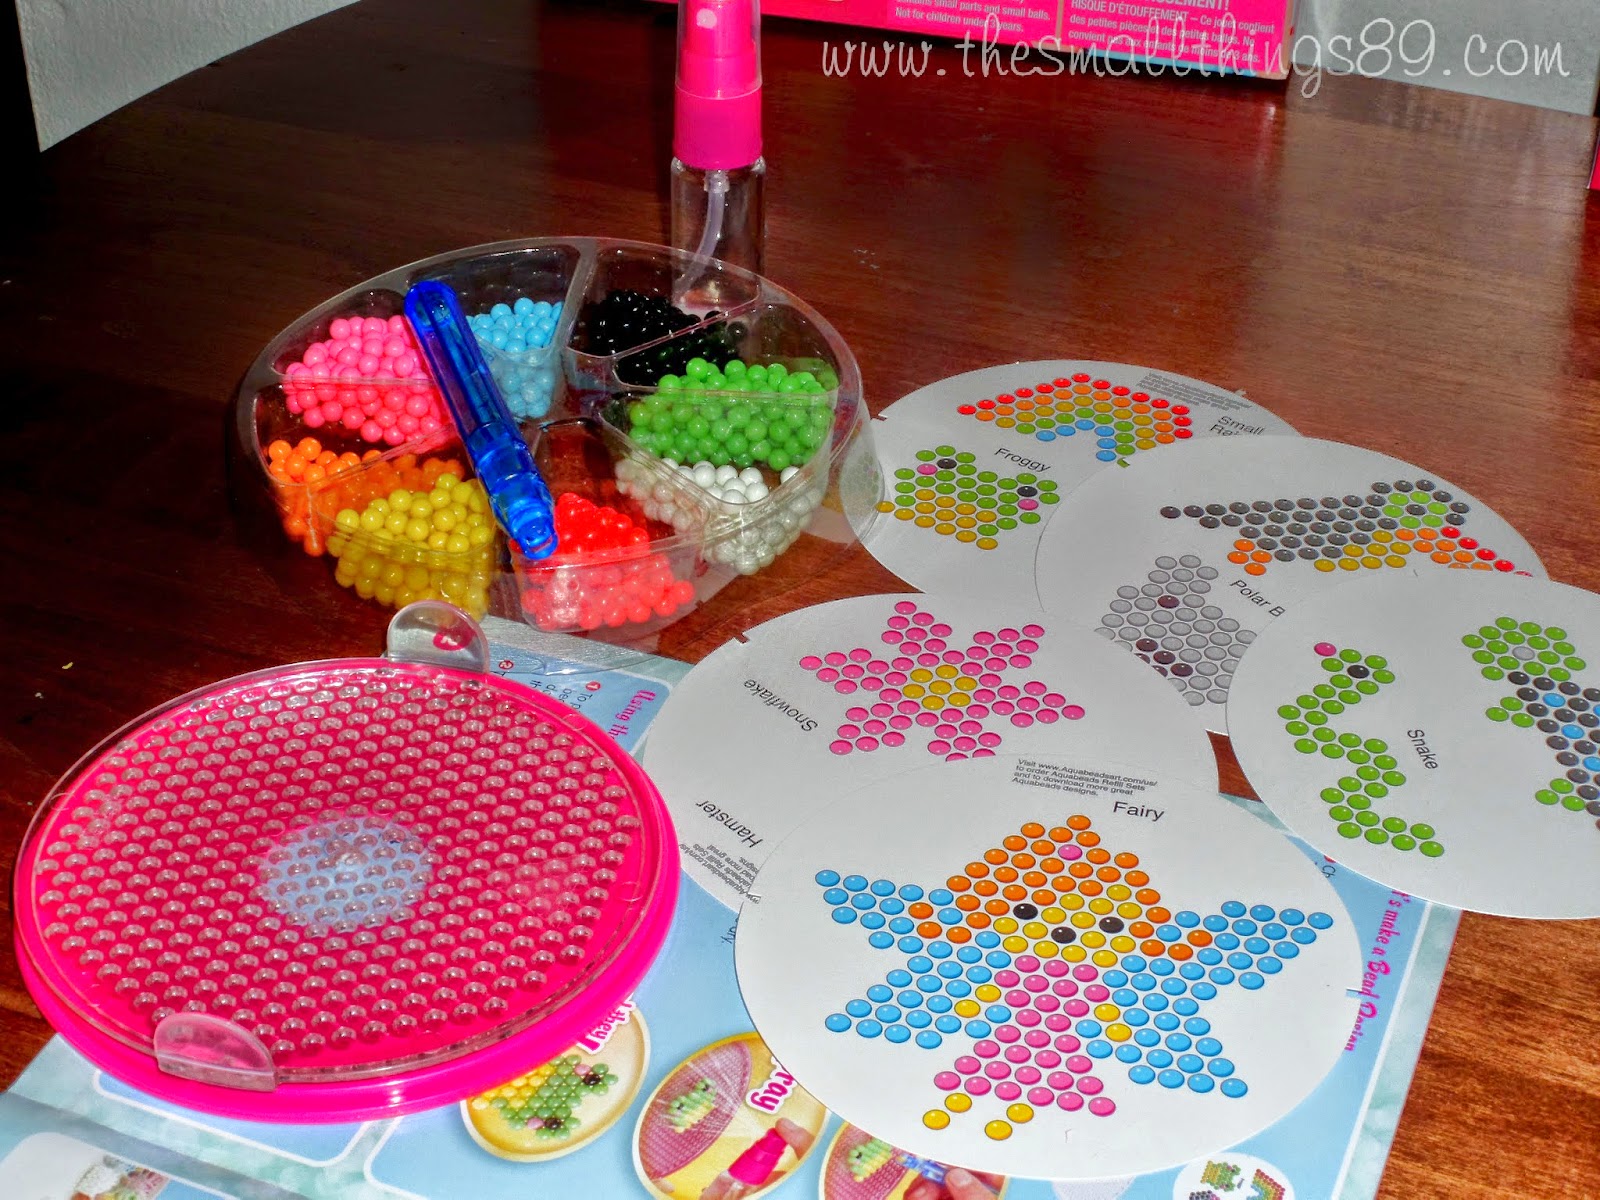 Aquabeads Jewel Starter set - a review - Over 40 and a Mum to One